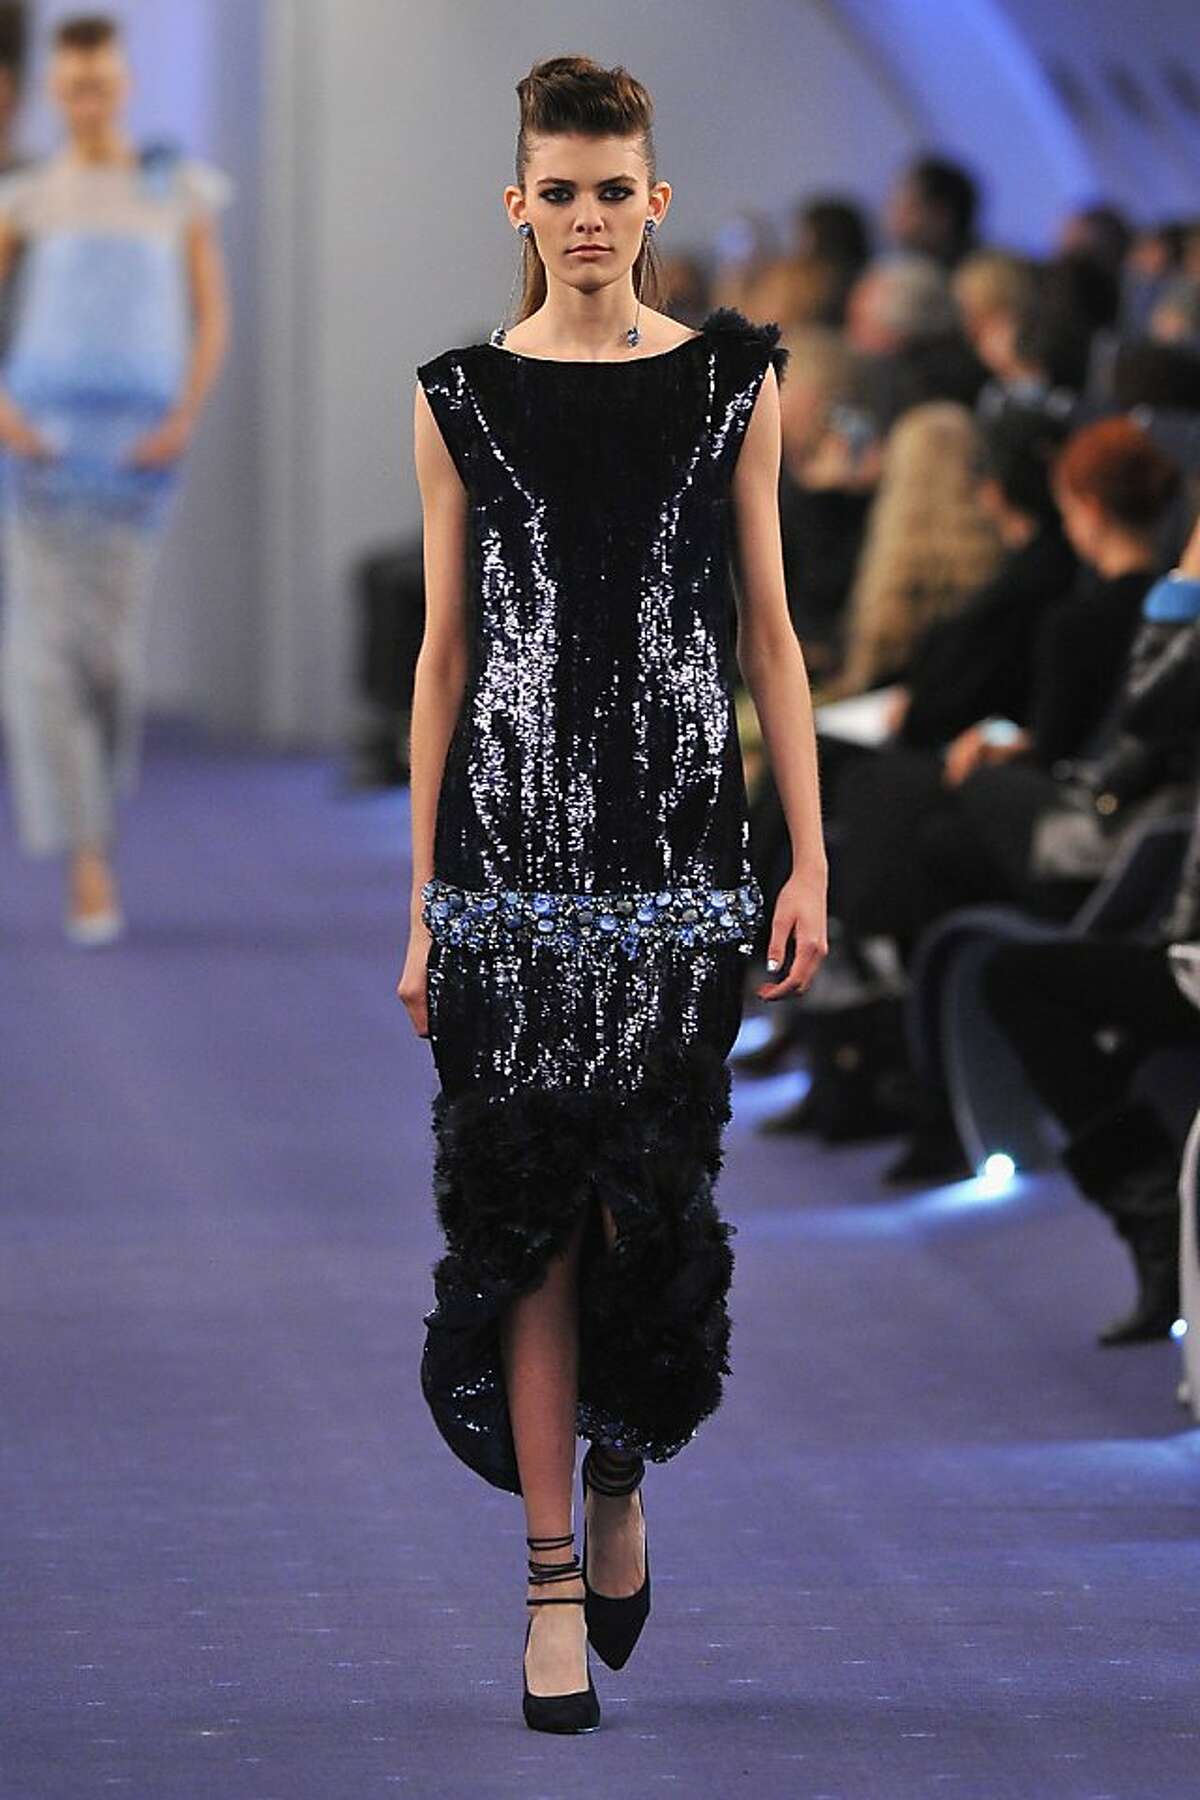 Paris shows off haute couture for Spring/Summer 2012